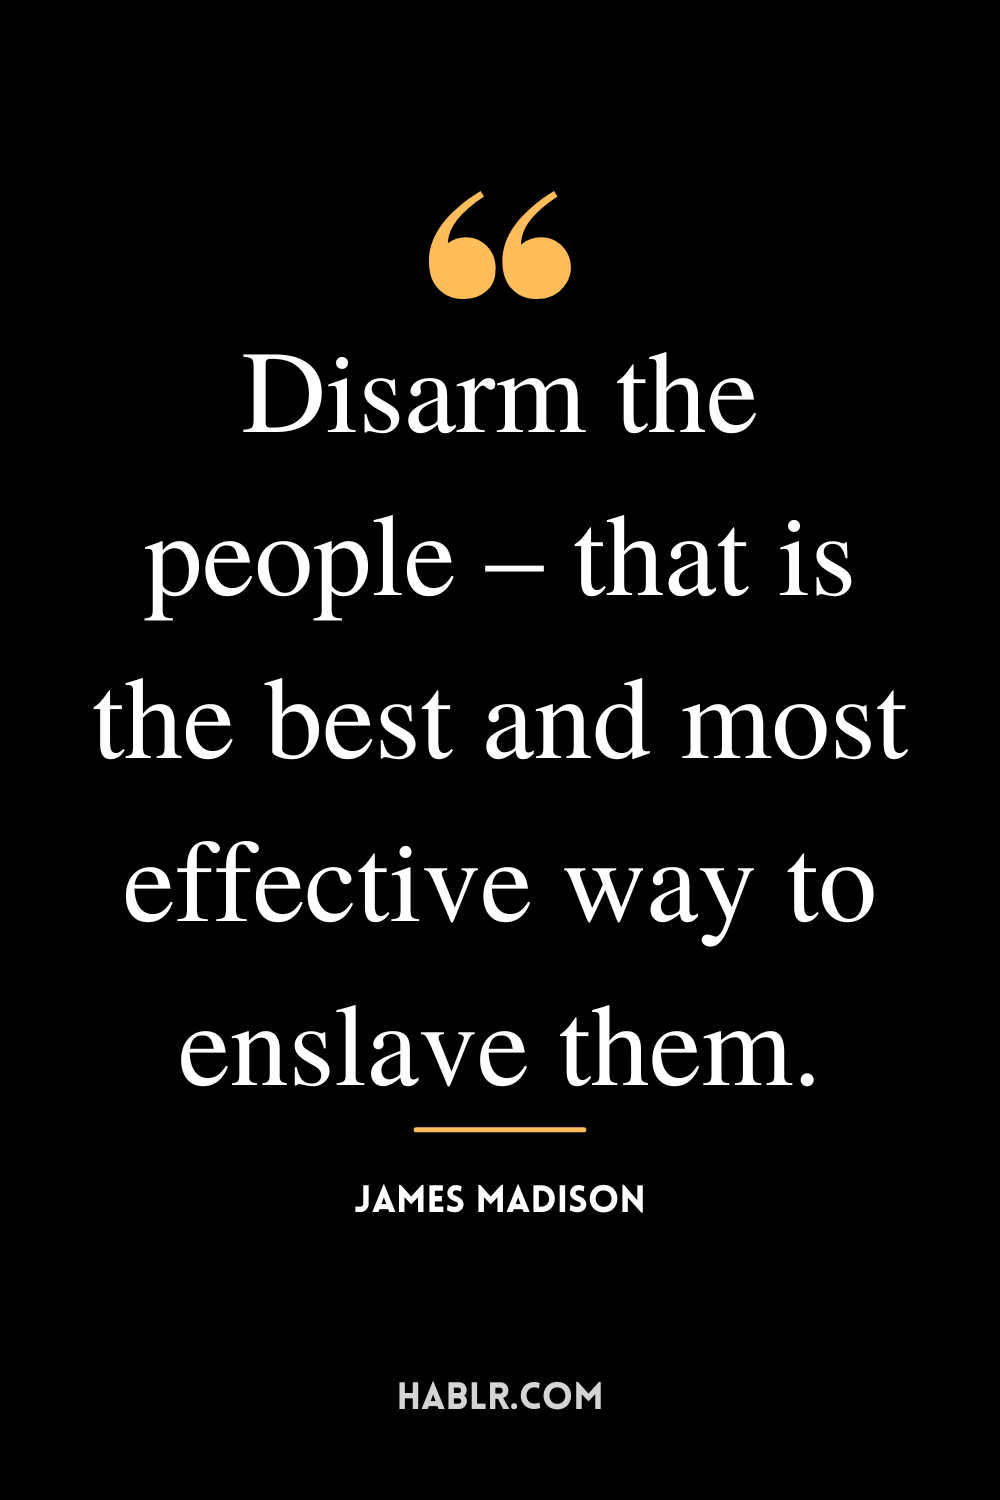 “Disarm the people – that is the best and most effective way to enslave them.” -James Madison